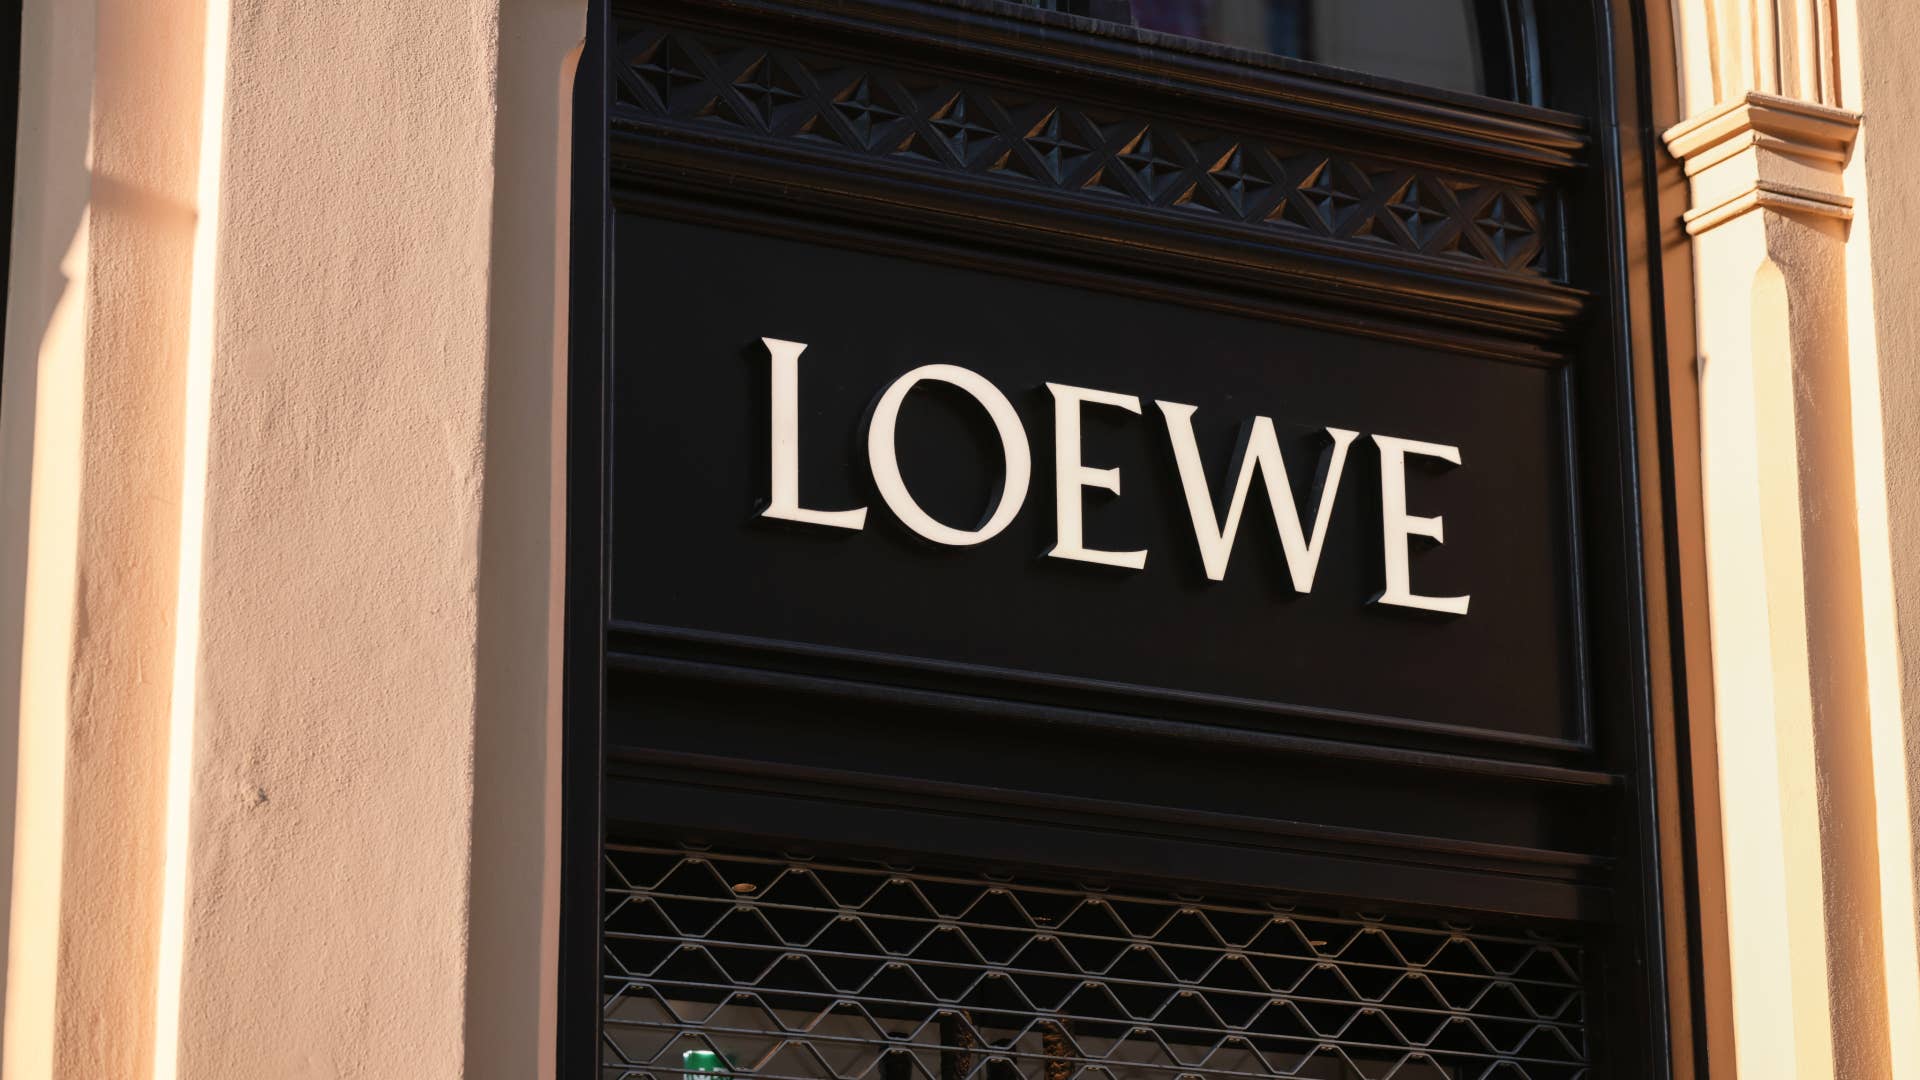 LOEWE logo is pictured on building